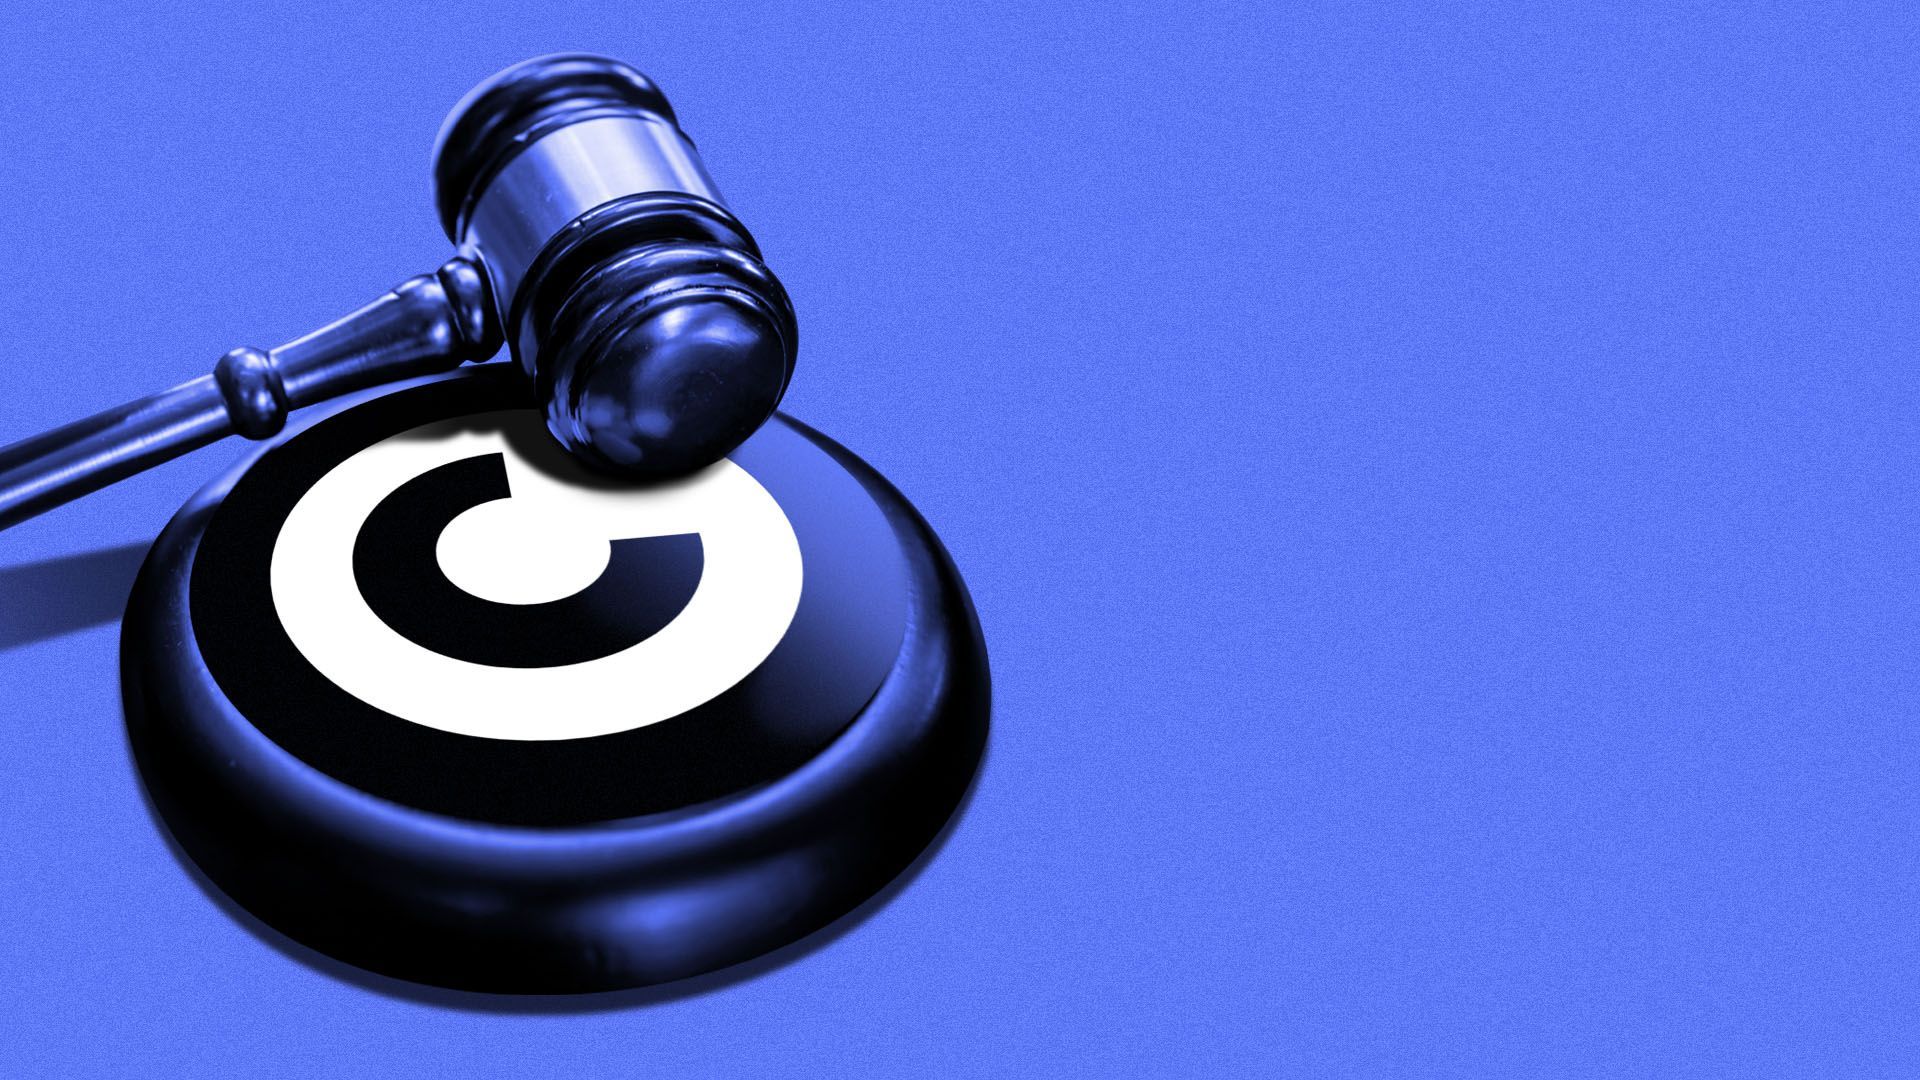 Illustration of a gavel on a sounding board with the copyright symbol on it